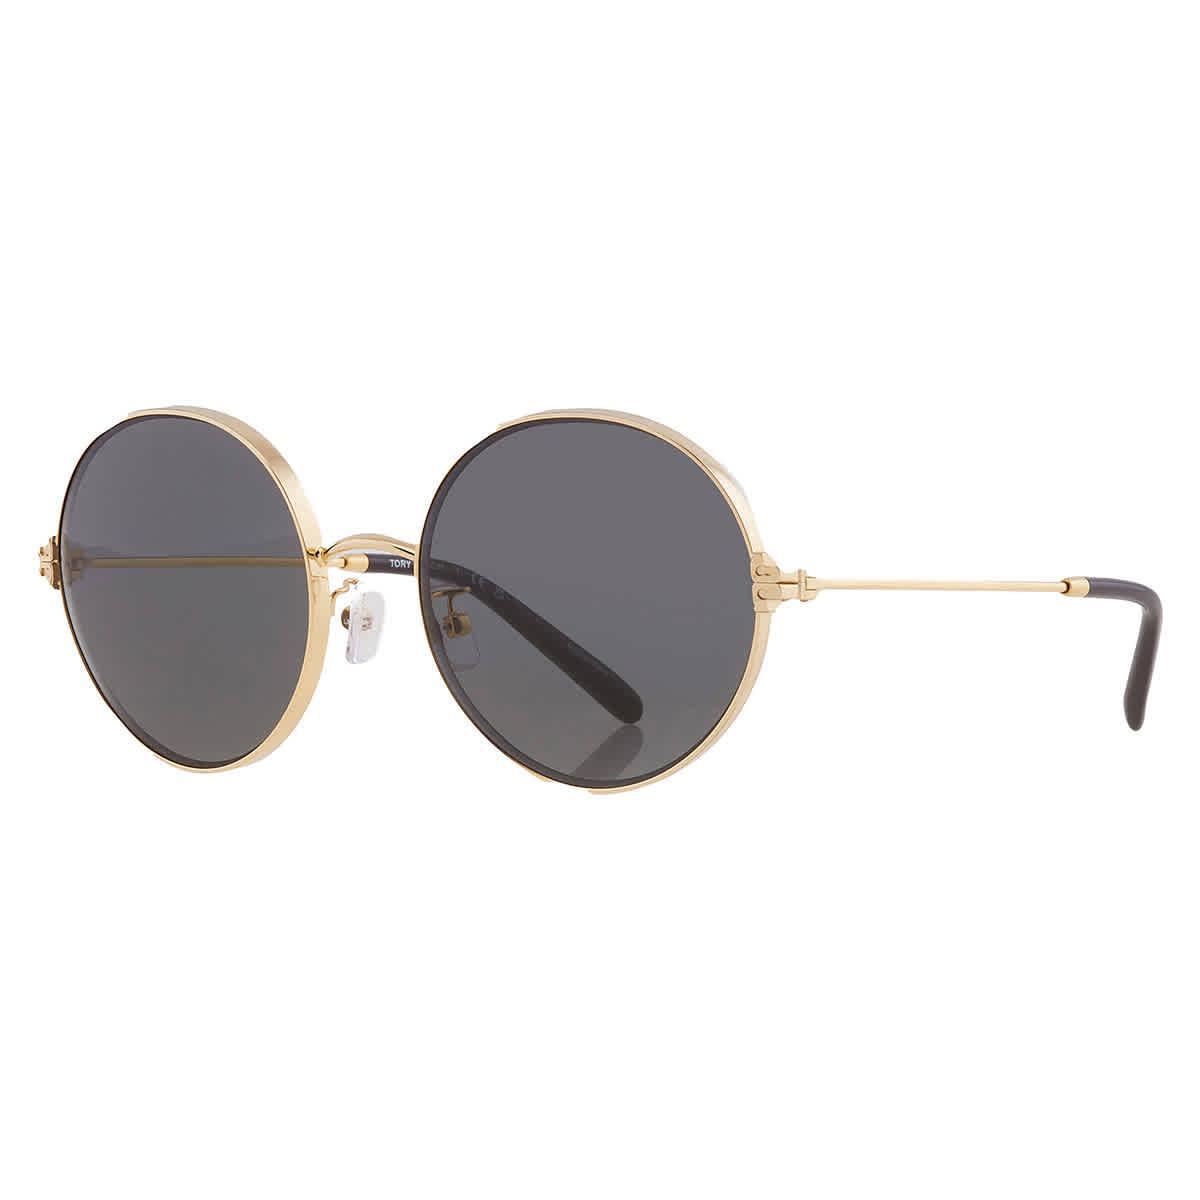 Tory Burch 54mm Round Sunglasses Product Image